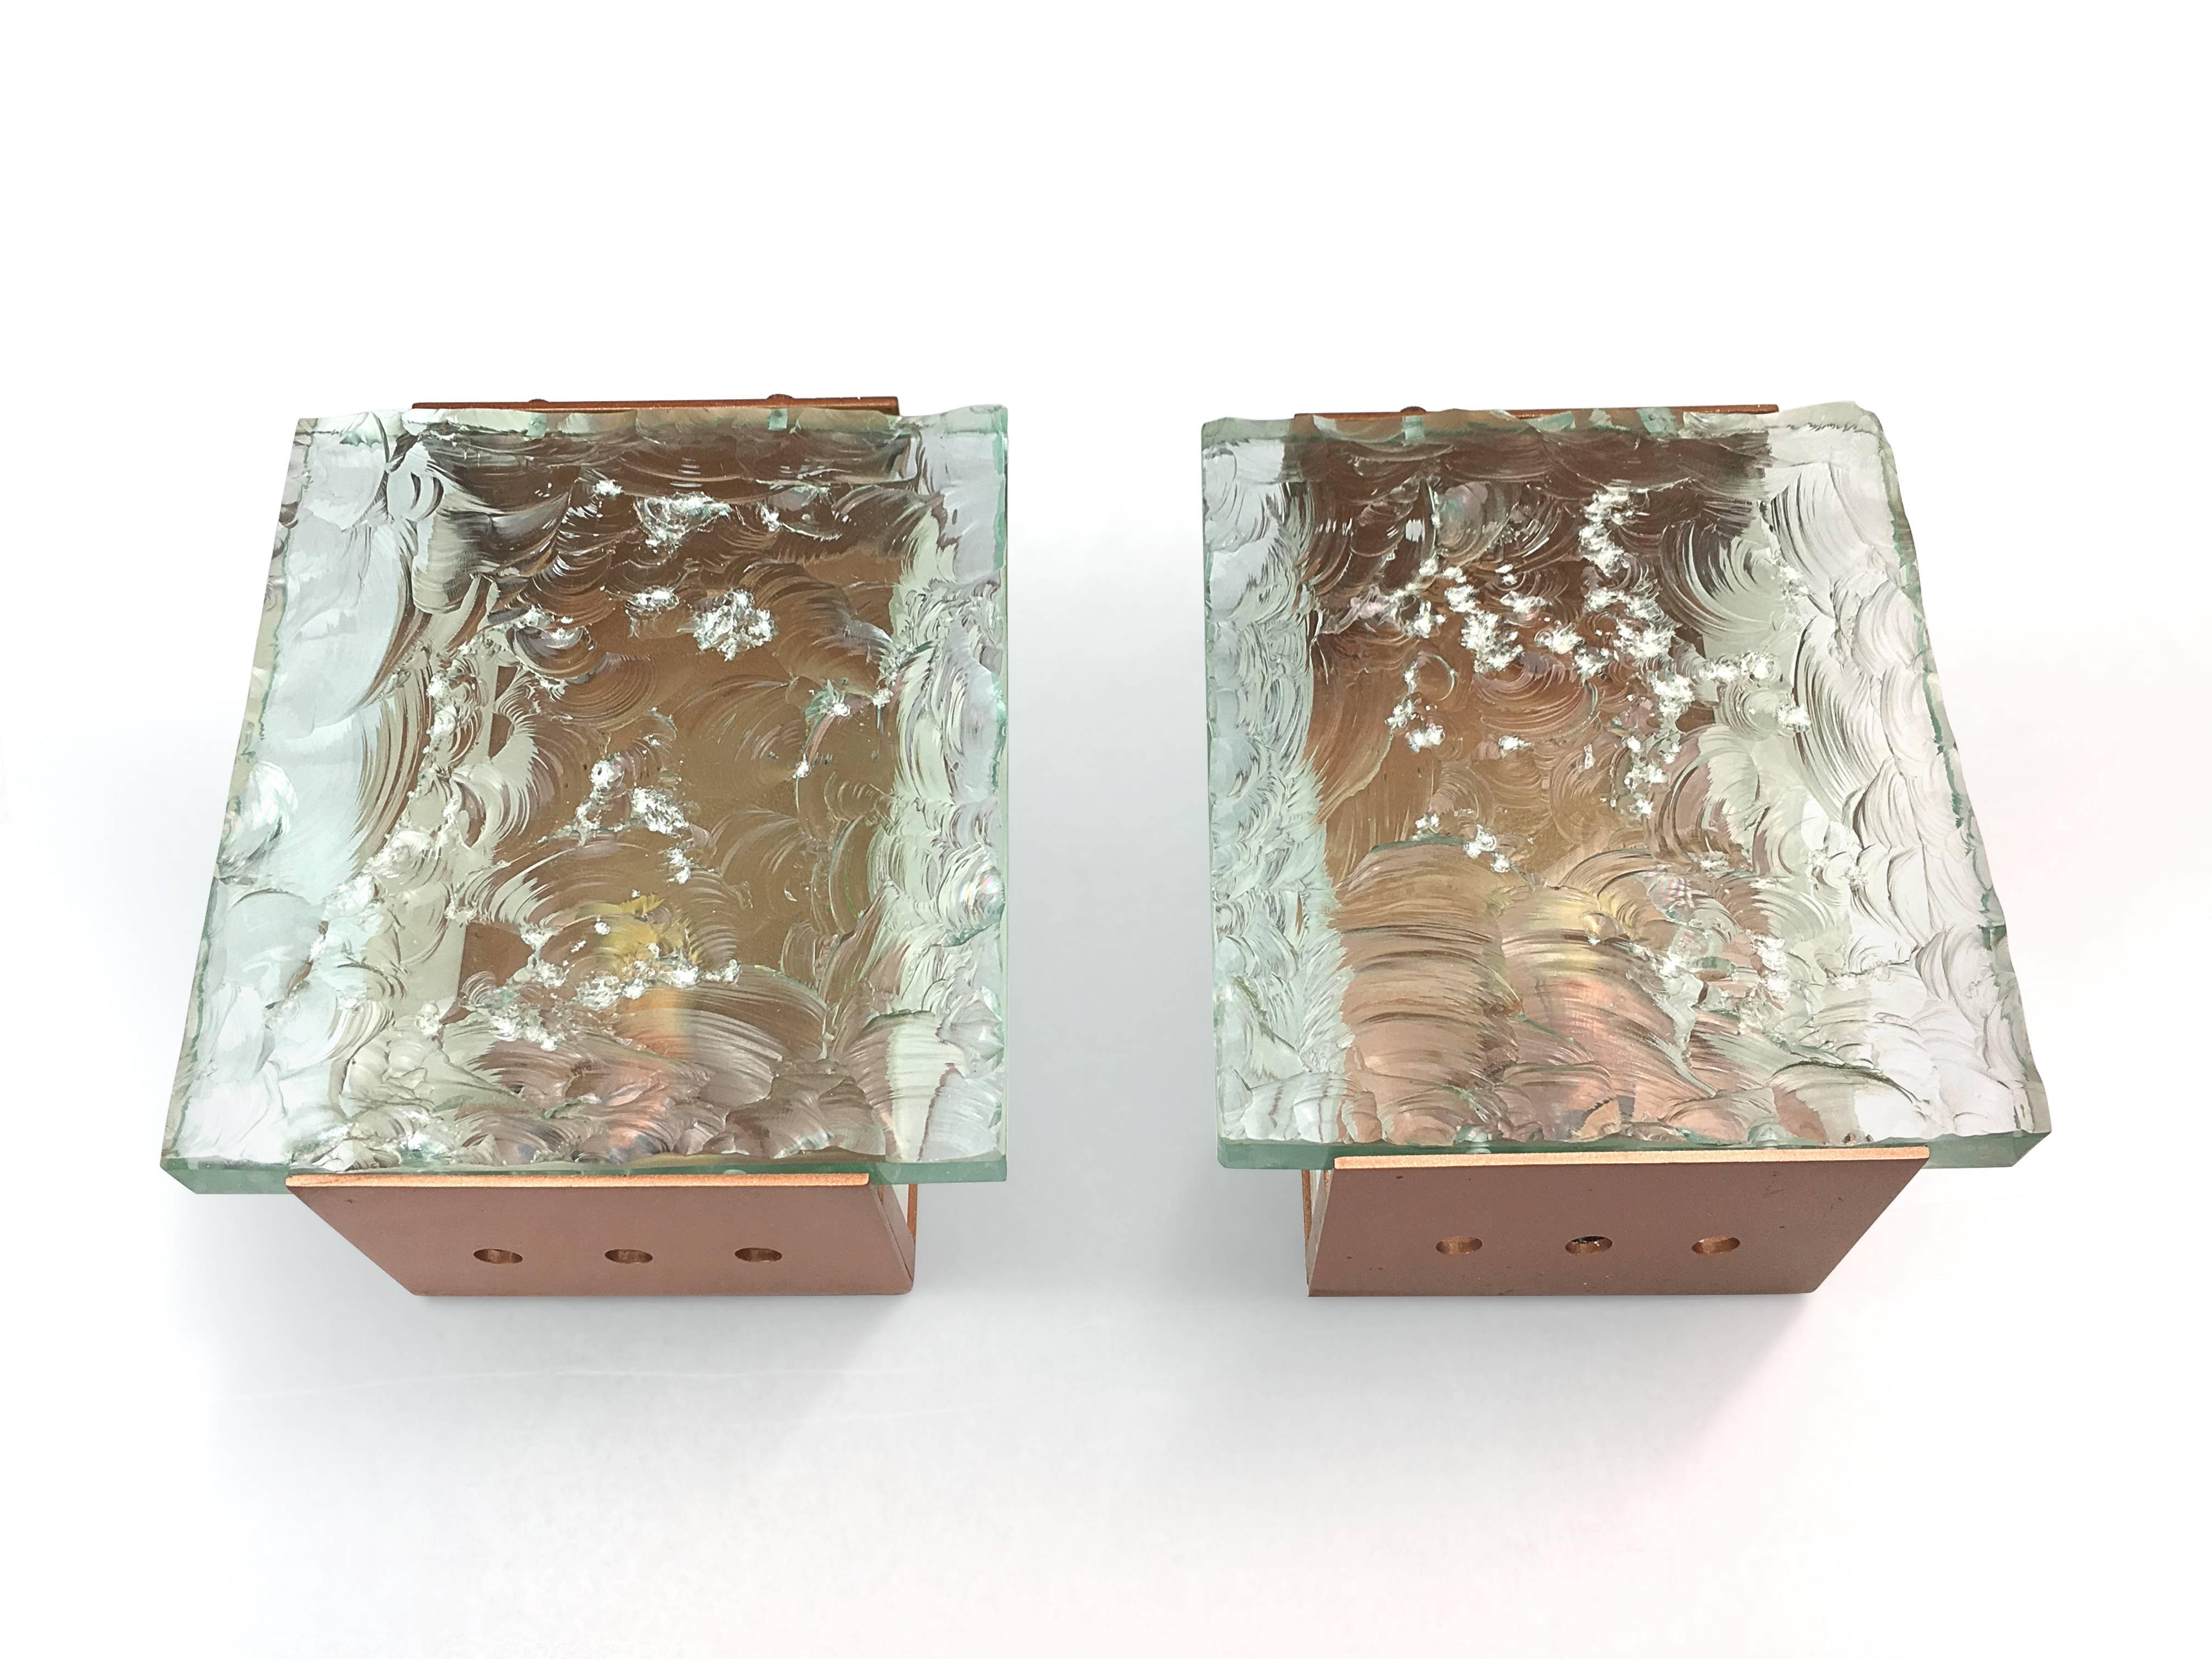 Two scones with decorative chiseled glass tops on the rectangular brass basements. Designed by Max Ingrand for Fontana Arte.